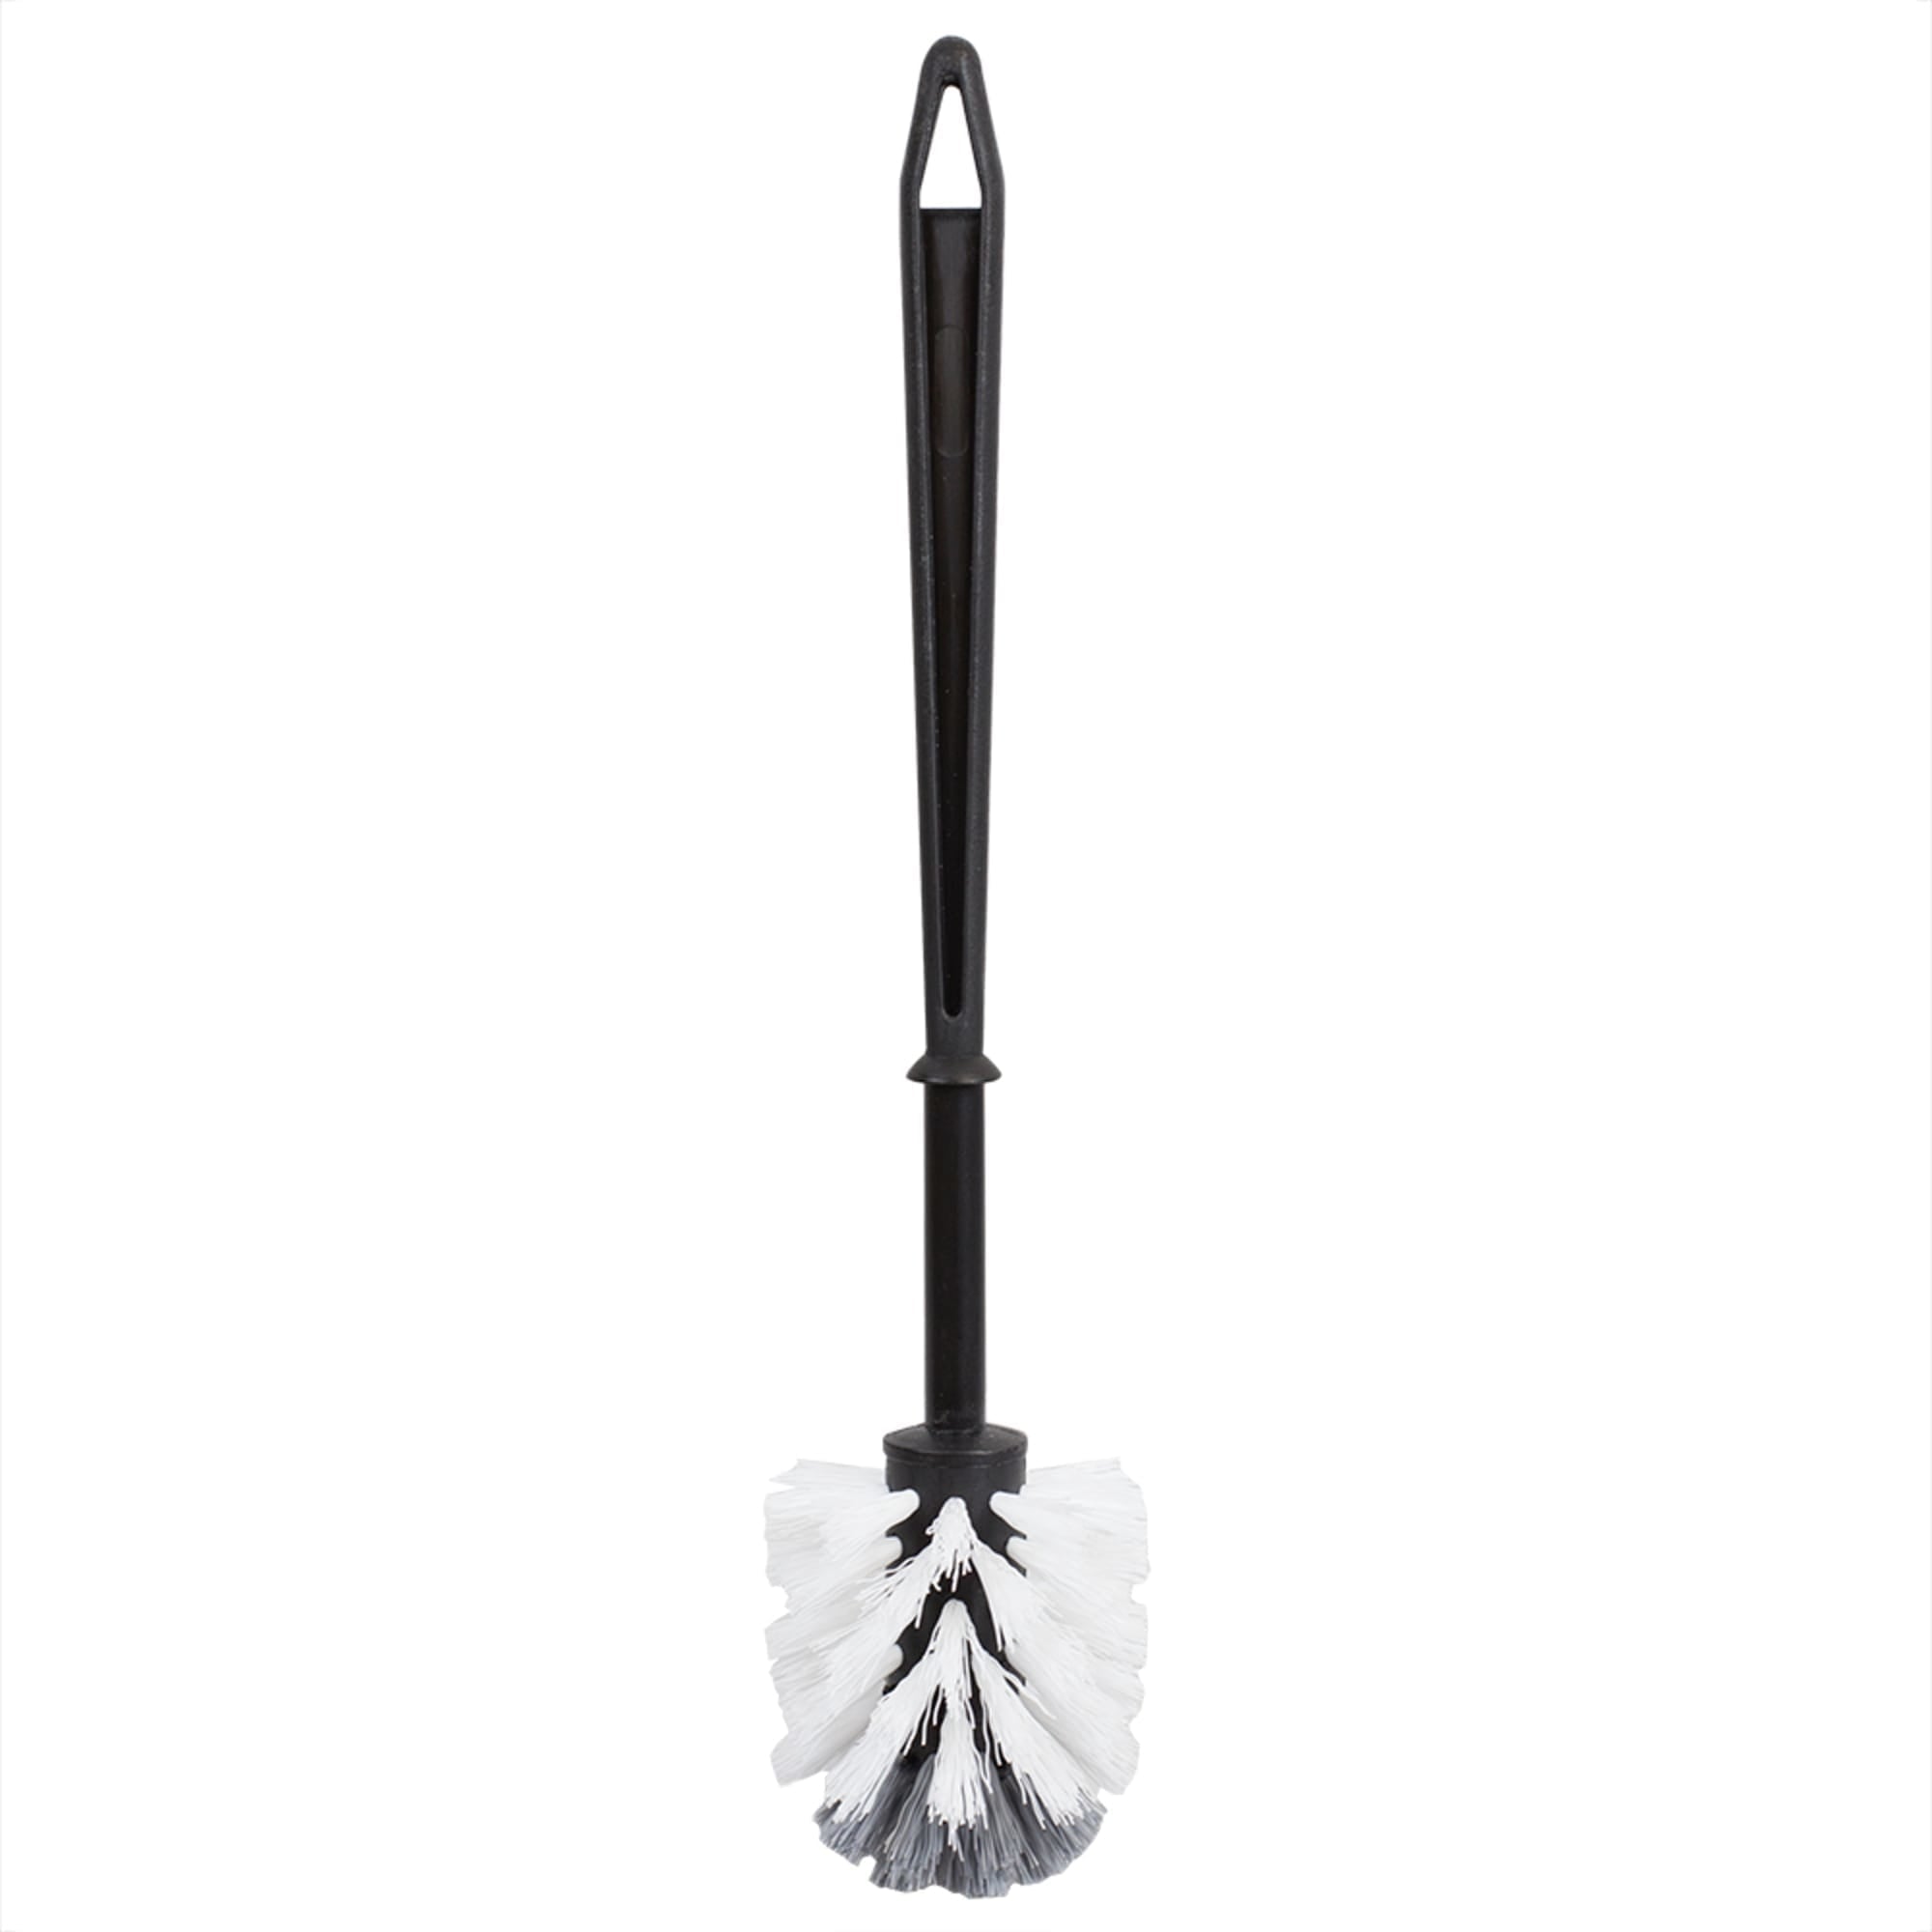 Home Basics Plastic Toilet Brush with Compact Holder, Black $4 EACH, CASE PACK OF 12